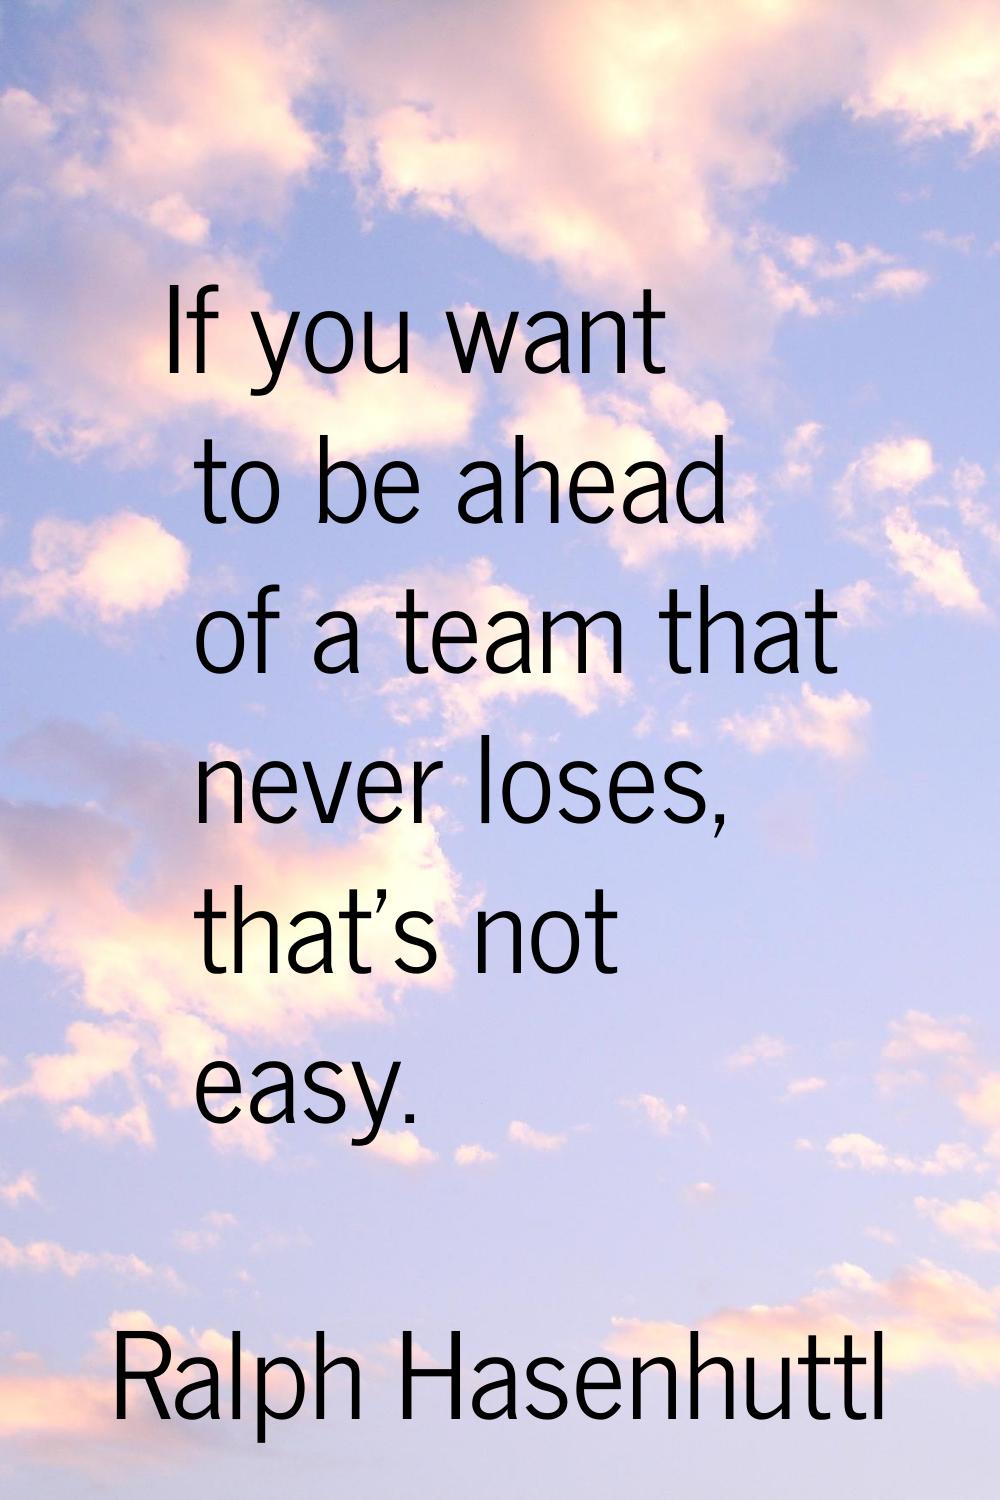 If you want to be ahead of a team that never loses, that's not easy.